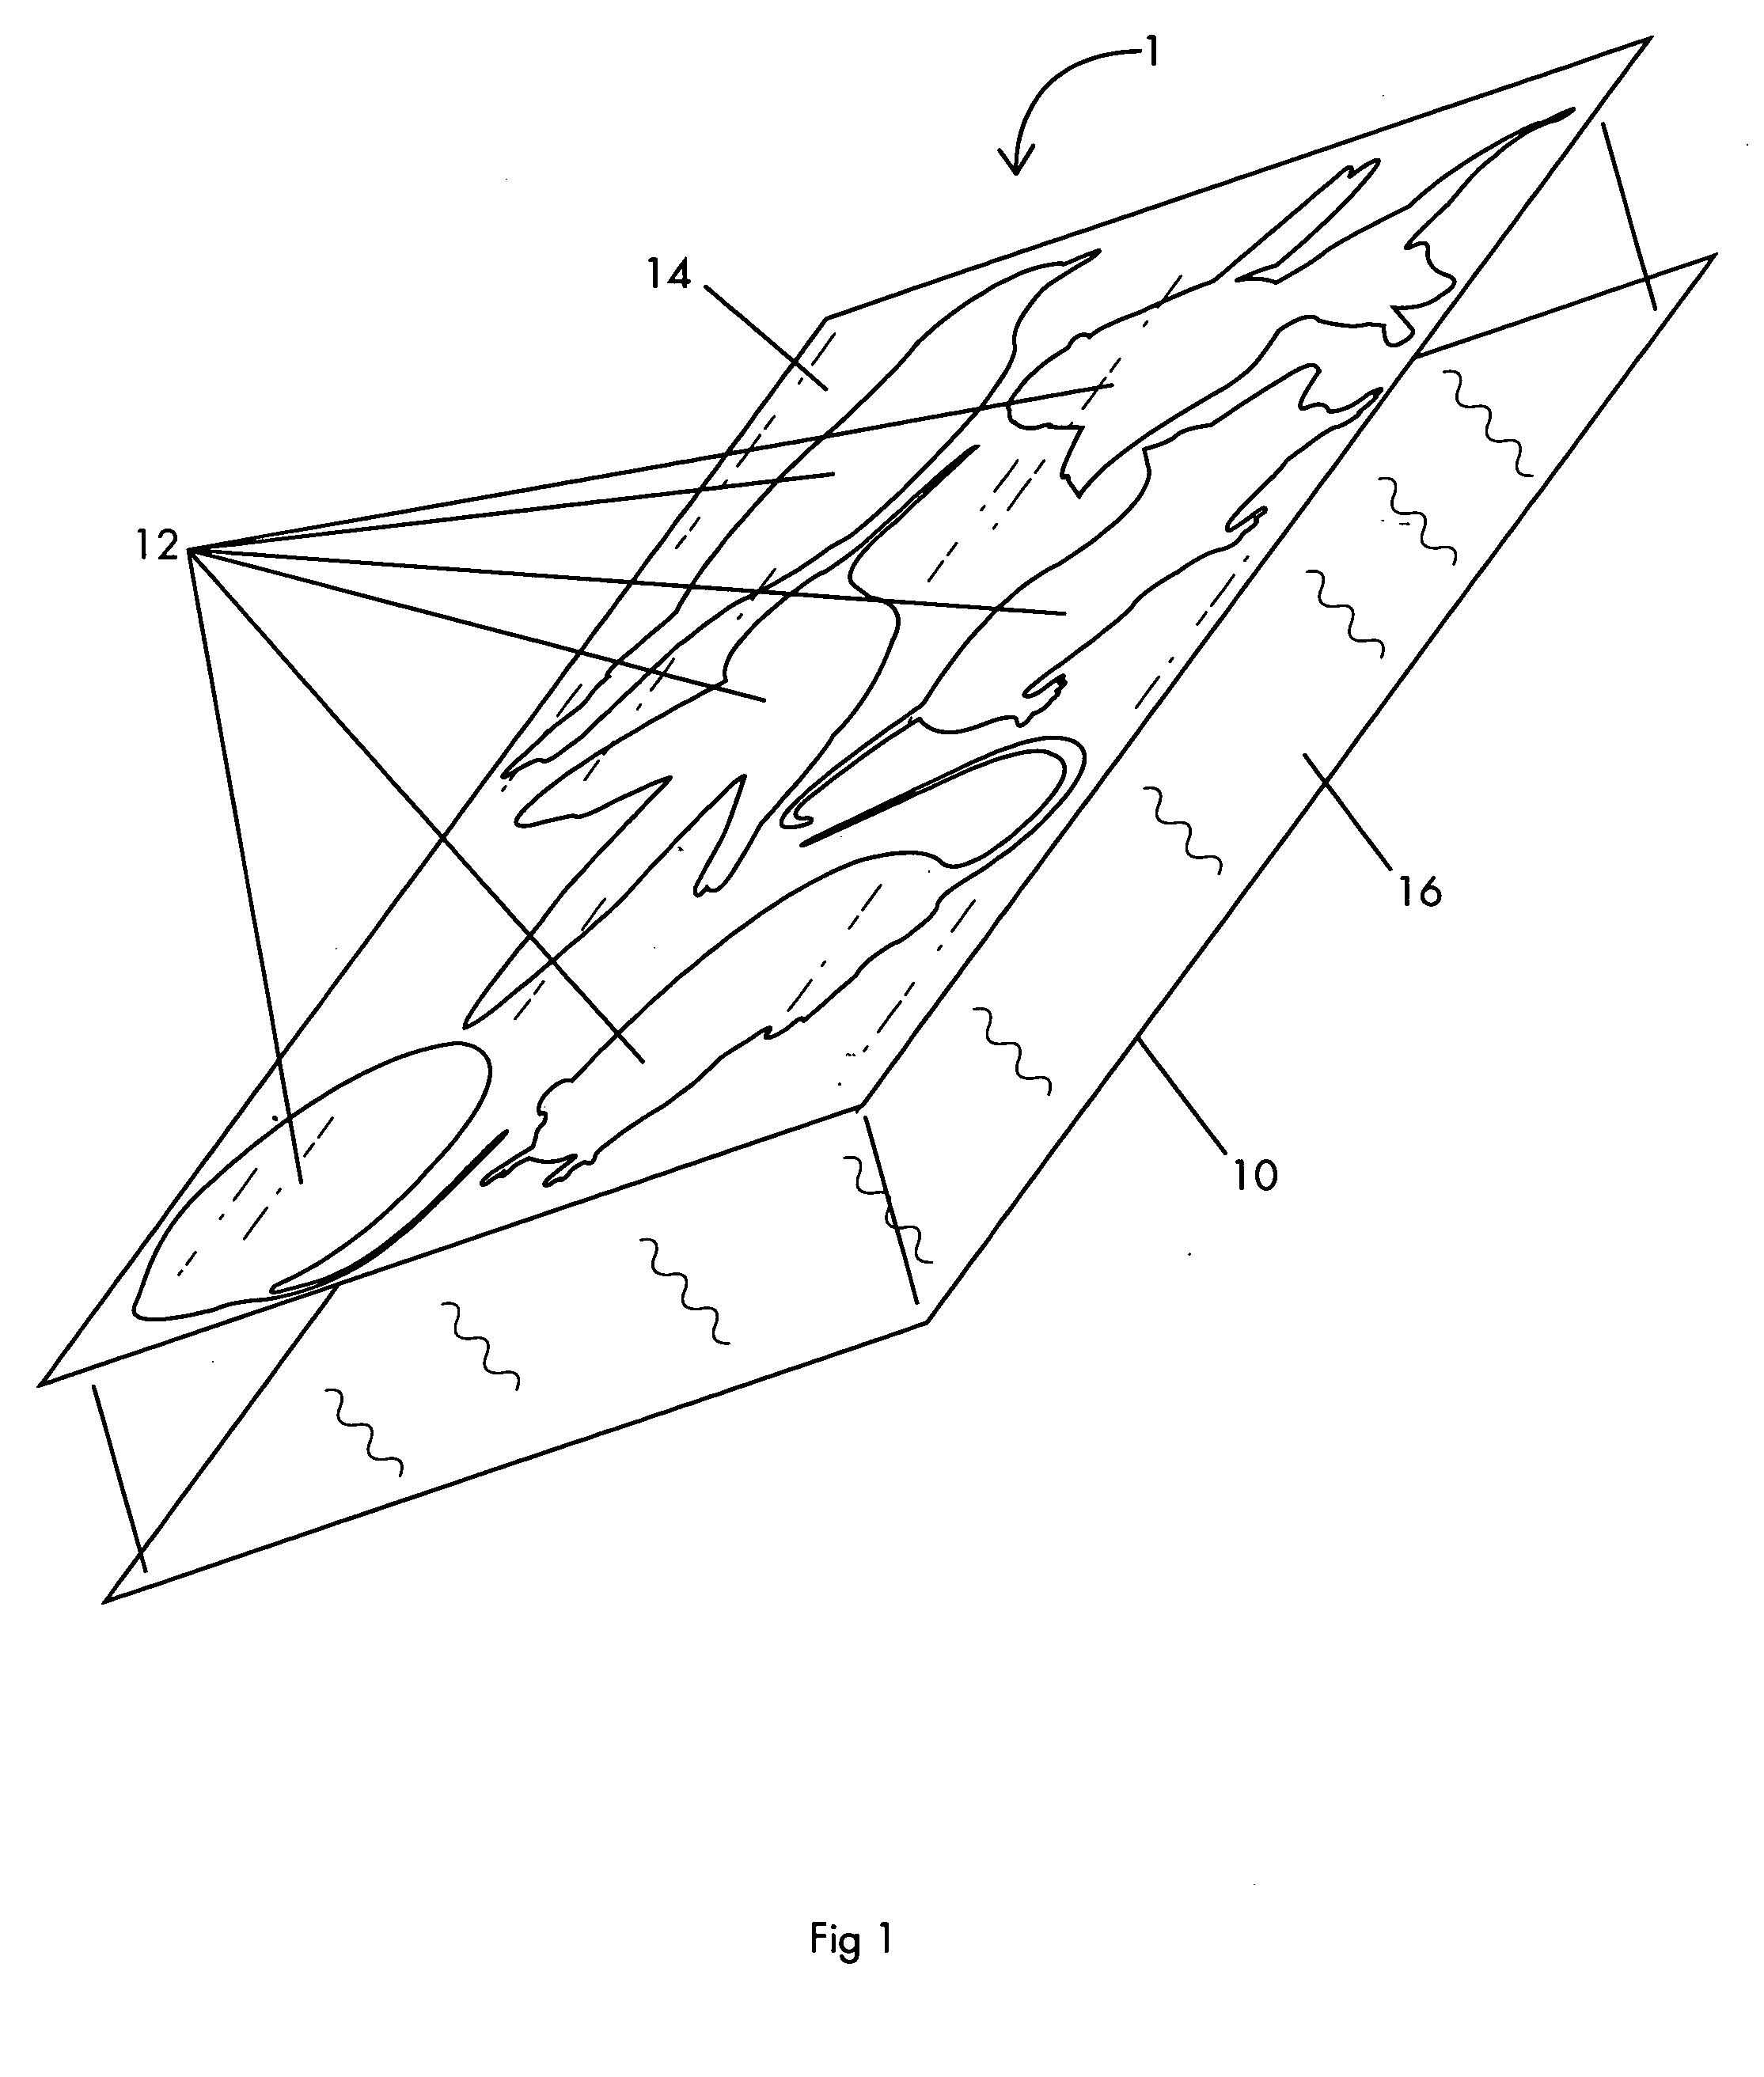 Composition of matter comprising edible surface and substrate, edible ink, non-toxic adhesive, and processed aromatic oil for attracting domesticated animals and process for making same